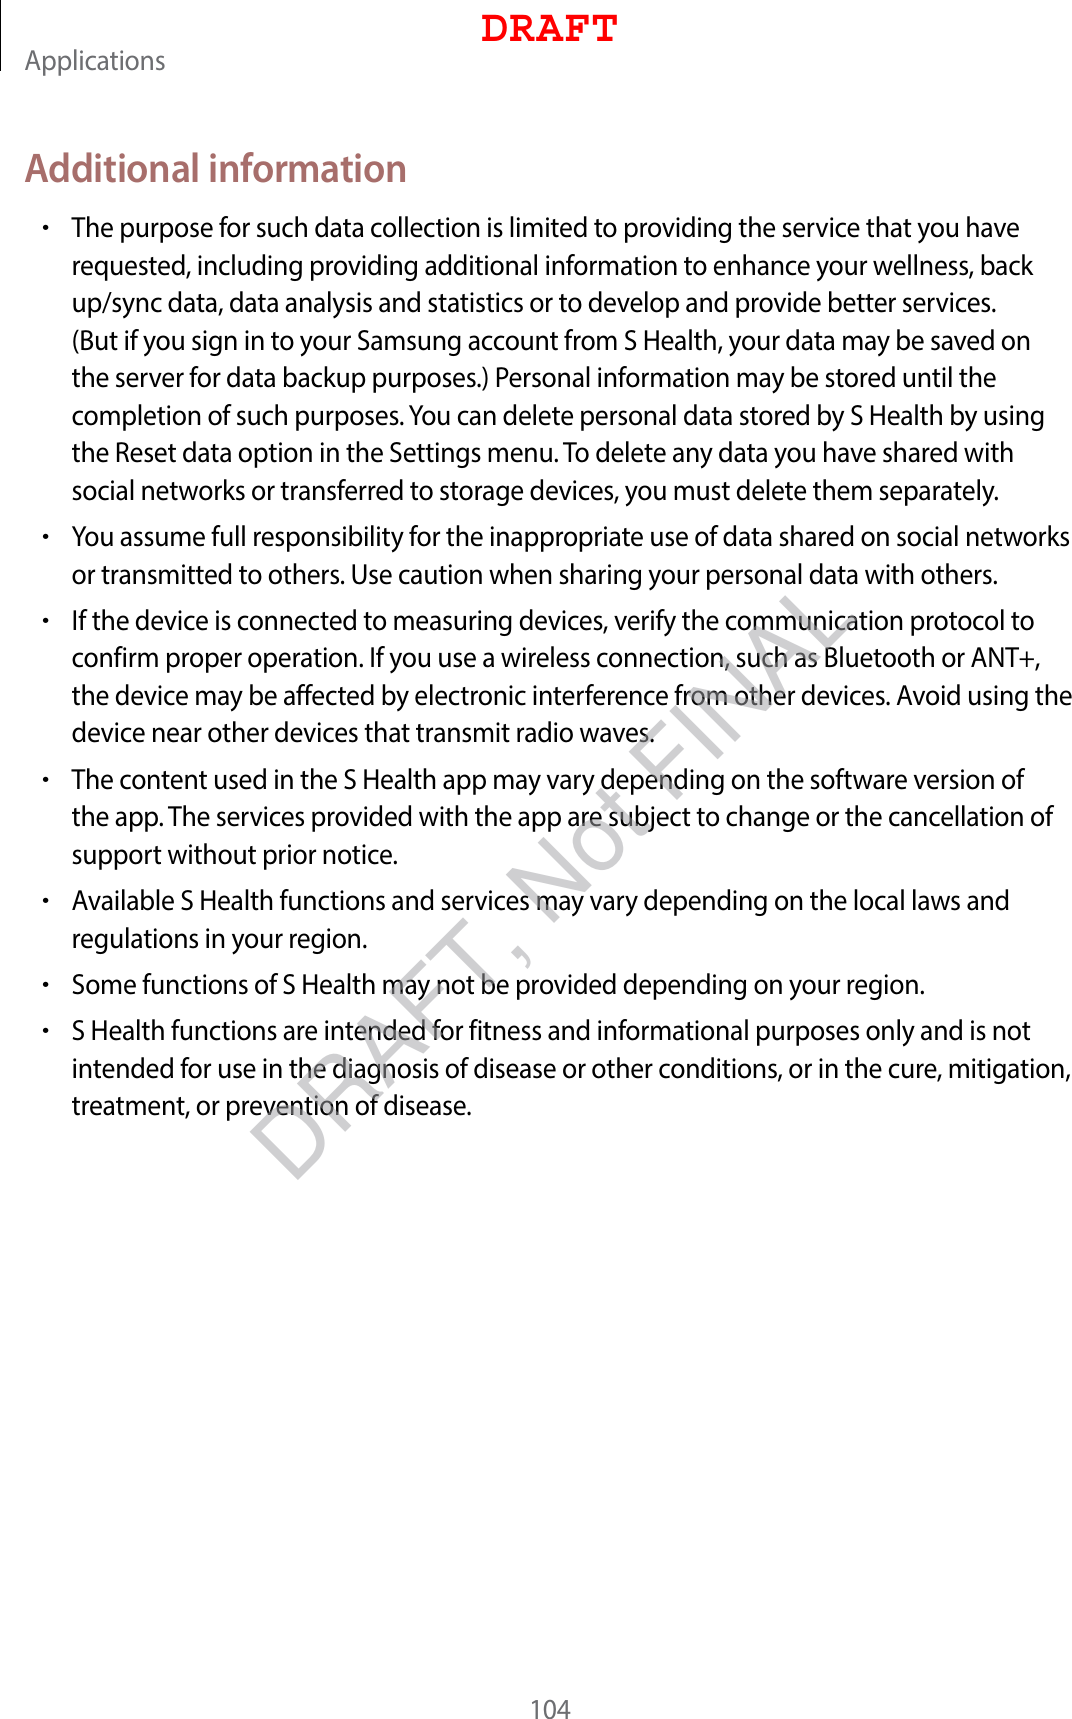 Applications104Additional information•The purpose for such data collection is limited to providing the service that you have requested, including providing additional information to enhance your wellness, back up/sync data, data analysis and statistics or to develop and provide better services. (But if you sign in to your Samsung account from S Health, your data may be saved on the server for data backup purposes.) Personal information may be stored until the completion of such purposes. You can delete personal data stored by S Health by using the Reset data option in the Settings menu. To delete any data you have shared with social networks or transferred to storage devices, you must delete them separately.•You assume full responsibility for the inappropriate use of data shared on social networks or transmitted to others. Use caution when sharing your personal data with others.•If the device is connected to measuring devices, verify the communication protocol to confirm proper operation. If you use a wireless connection, such as Bluetooth or ANT+, the device may be affected by electronic interference from other devices. Avoid using the device near other devices that transmit radio waves.•The content used in the S Health app may vary depending on the software version of the app. The services provided with the app are subject to change or the cancellation of support without prior notice.•Available S Health functions and services may vary depending on the local laws and regulations in your region.•Some functions of S Health may not be provided depending on your region.•S Health functions are intended for fitness and informational purposes only and is not intended for use in the diagnosis of disease or other conditions, or in the cure, mitigation, treatment, or prevention of disease.DRAFTDRAFT, Not FINAL